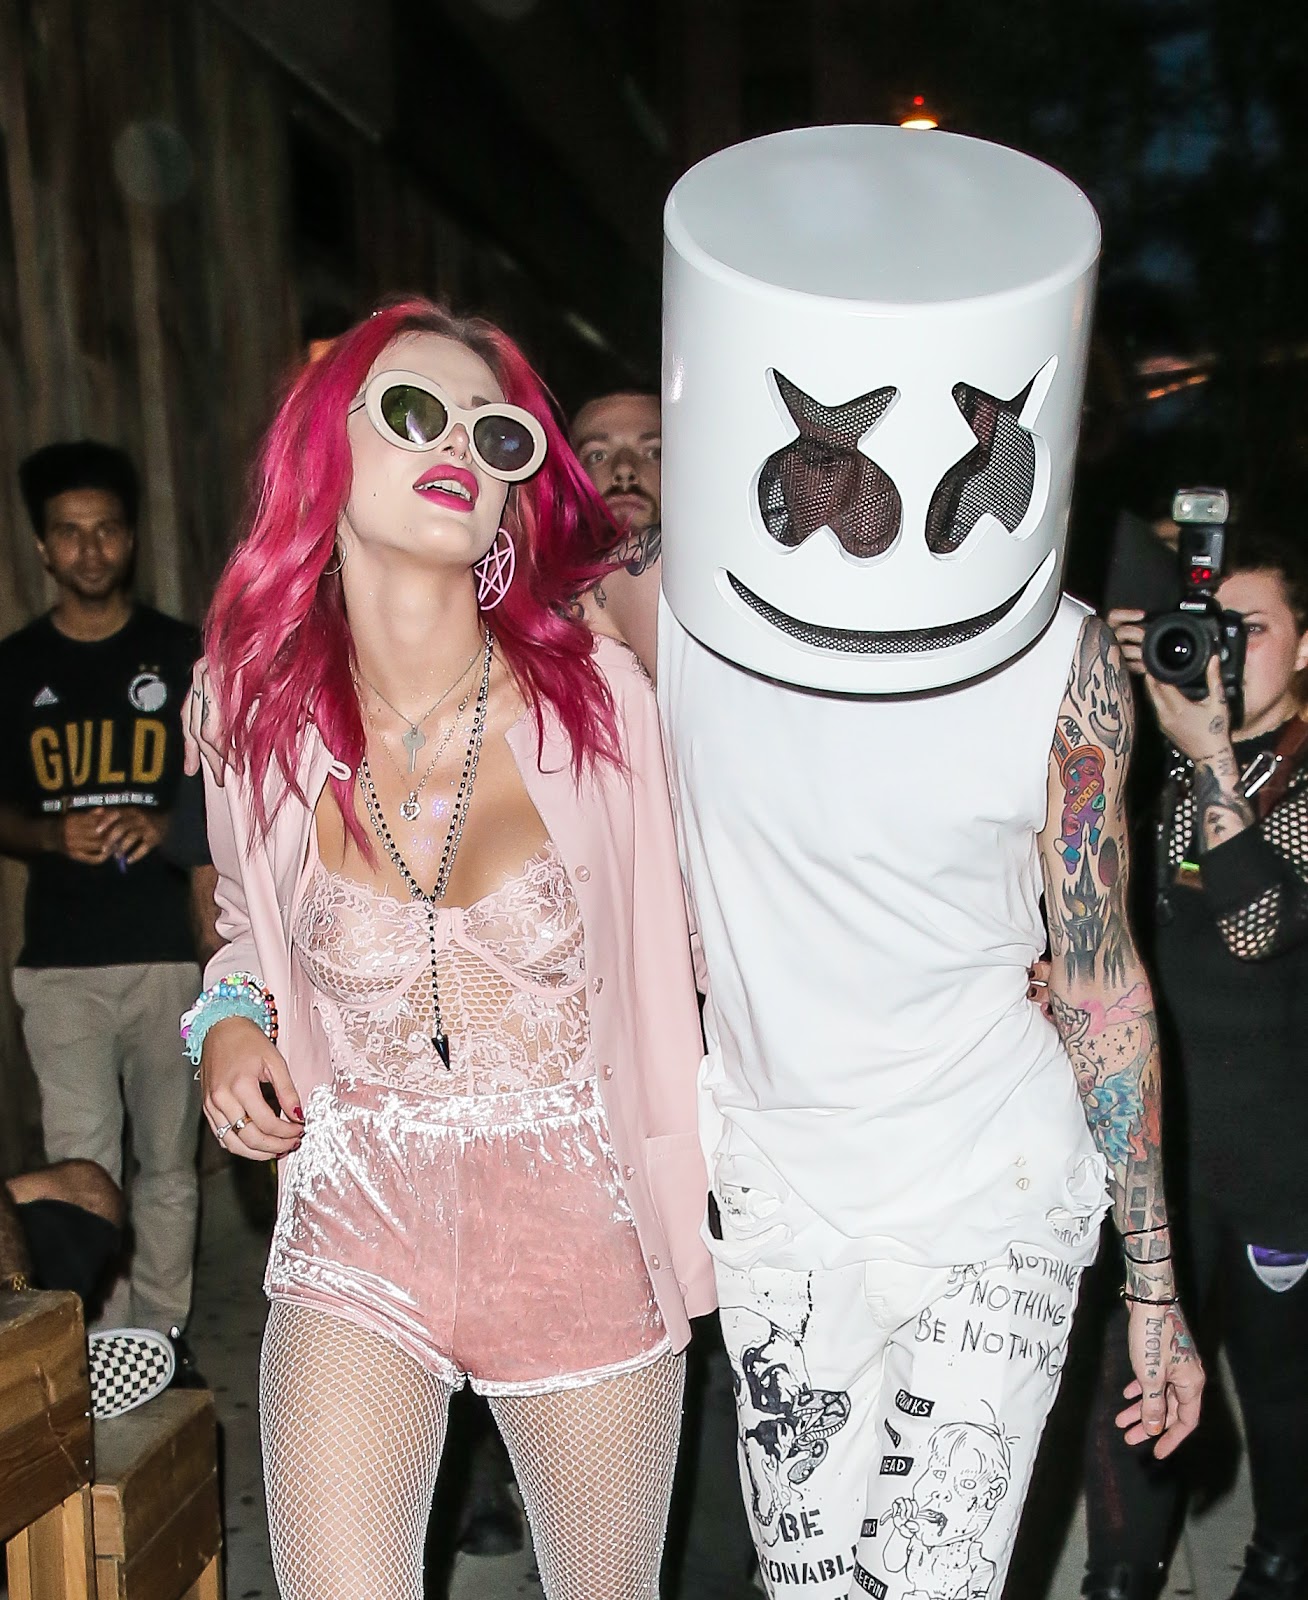 Bella Thorne bares all in see-through lace top as she parties in all-pink outfit in New York